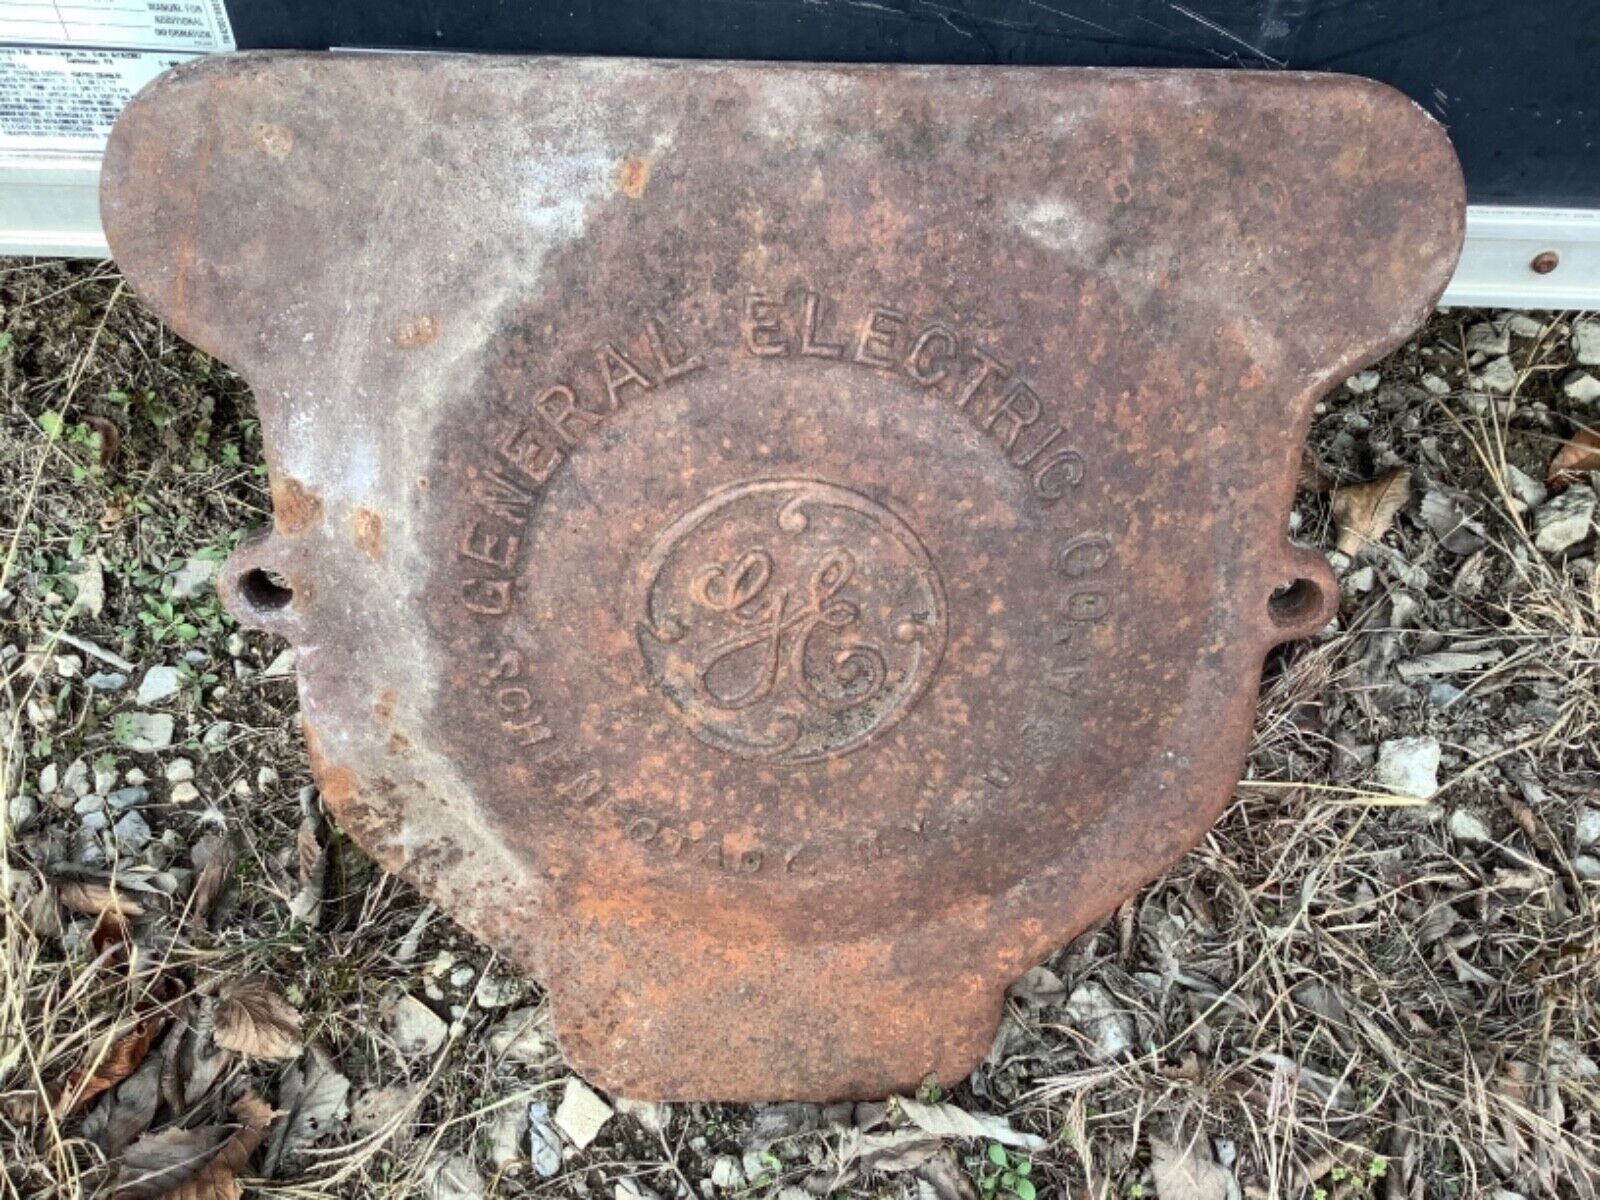 Vintage New York USA General Electric Meter Box Cover manhole